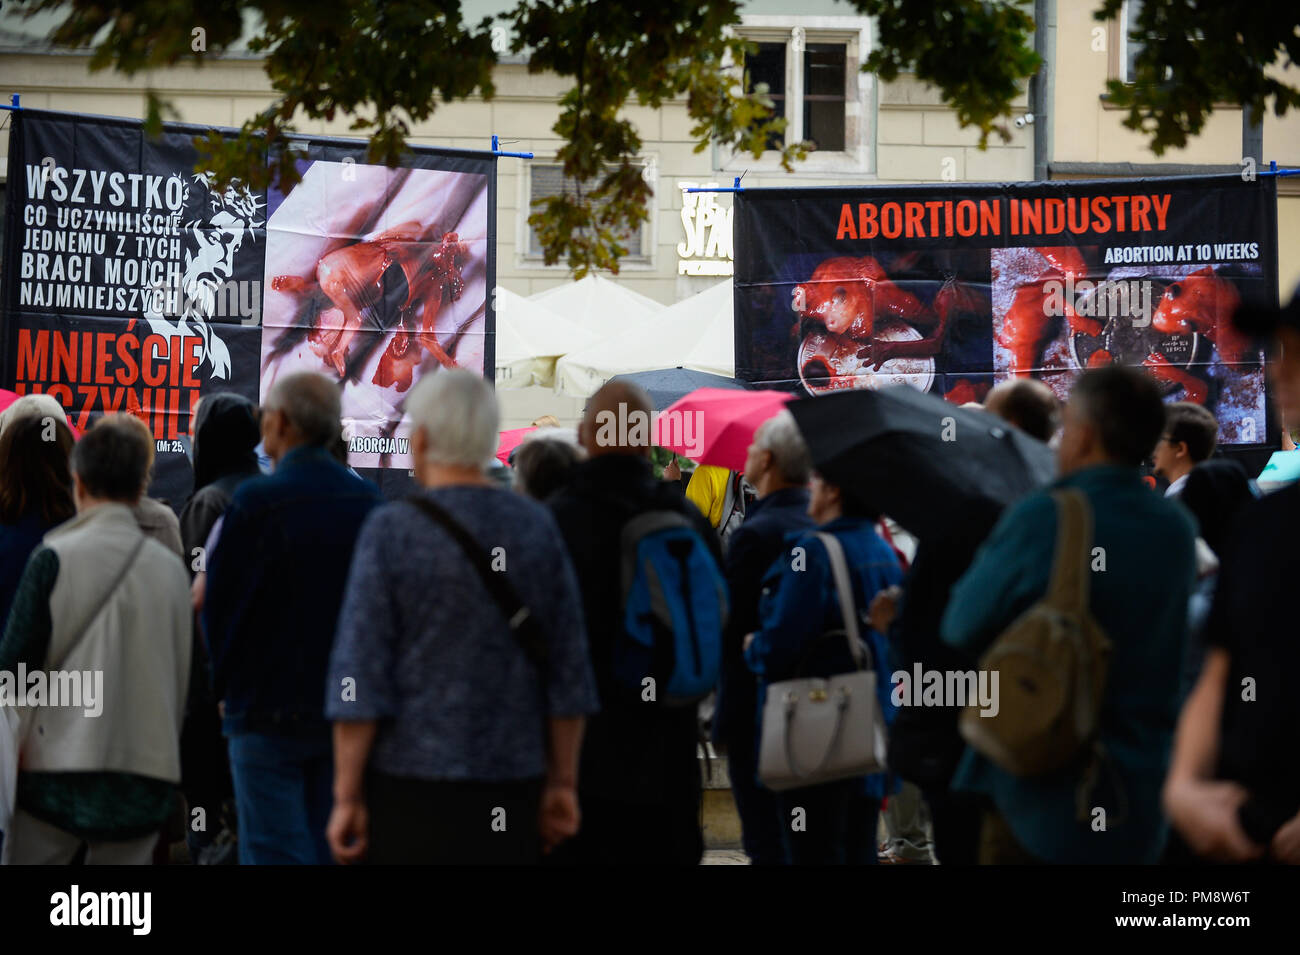 People seen standing next to anti abortion banners during the public Rosary against abortion. A public Rosary at the city center organized by Fundacja Pro, a prolife and anti-abortion association. Fetus deaths due to abortion were prayed for. There was a case of a counter protest from an abortion supporter. Stock Photo